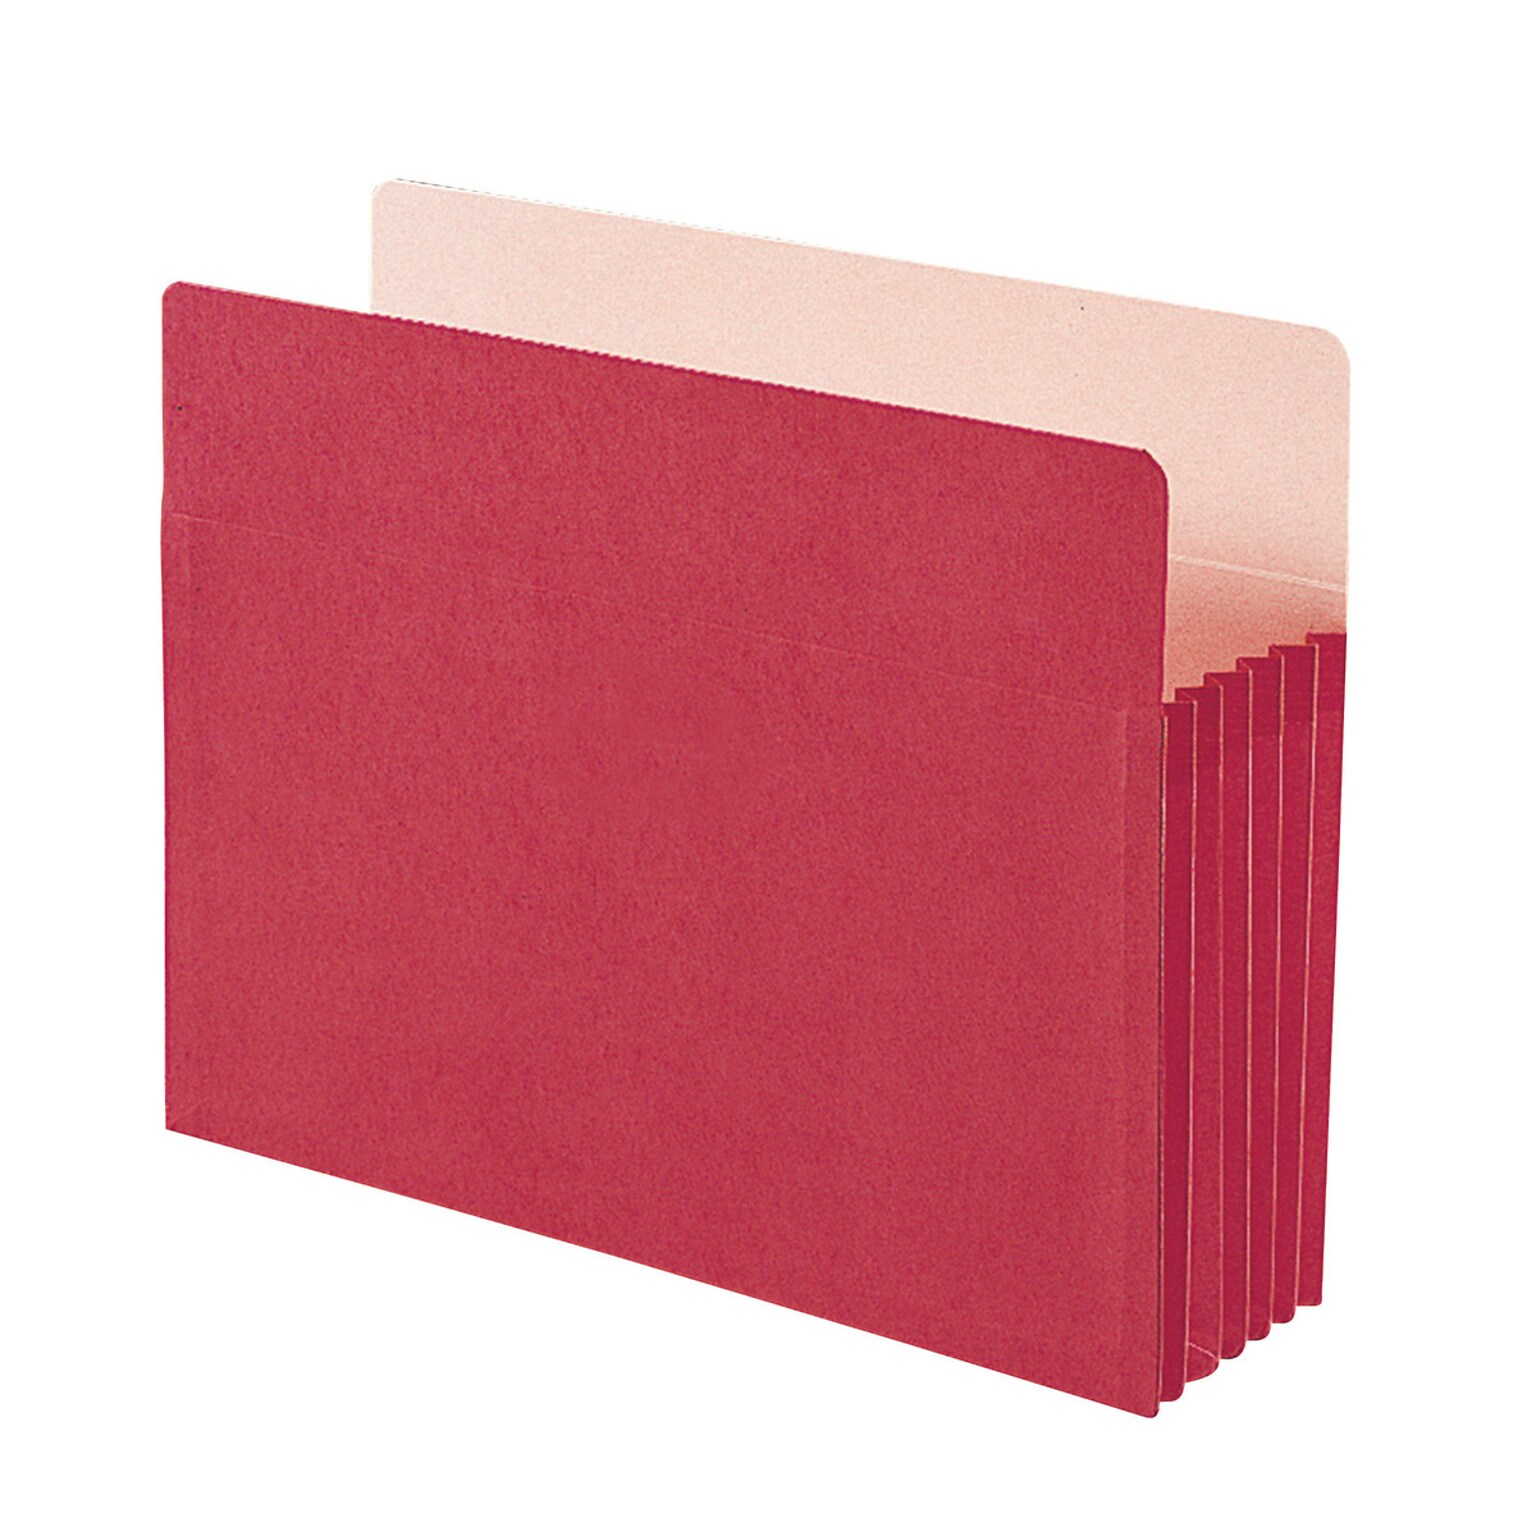 Smead 10% Recycled Reinforced File Pocket, 5 1/4 Expansion, Letter Size, Red, 10/Box (73241BX)